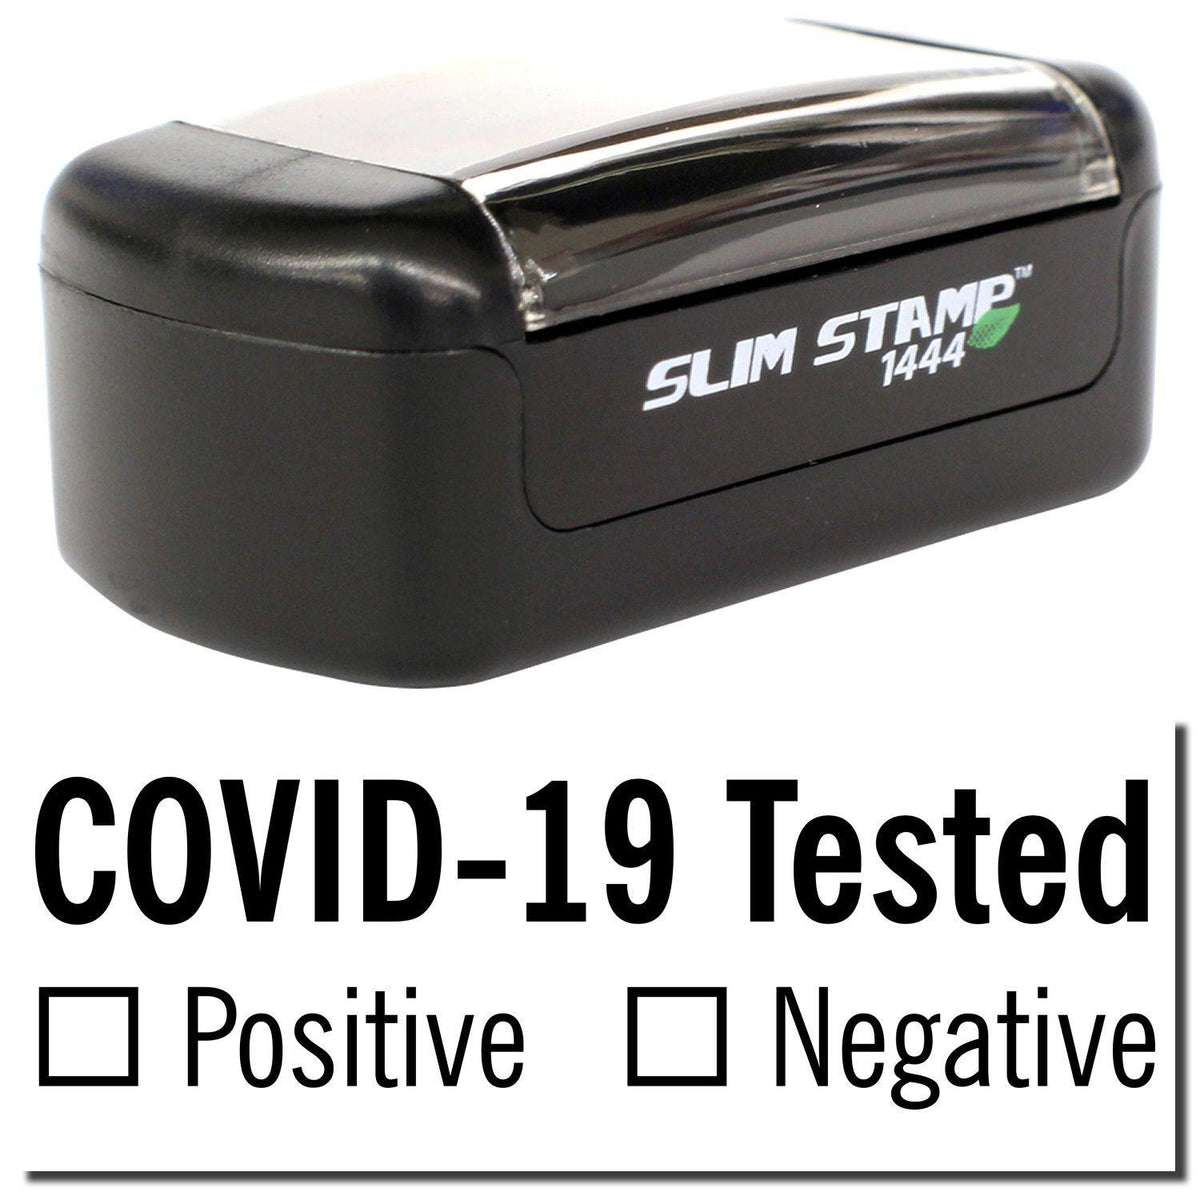 A stock office pre-inked stamp with a stamped image showing how the text &quot;COVID-19 Tested&quot; with a space underneath to check a box based on whether a person is positive or negative for the virus is displayed after stamping.